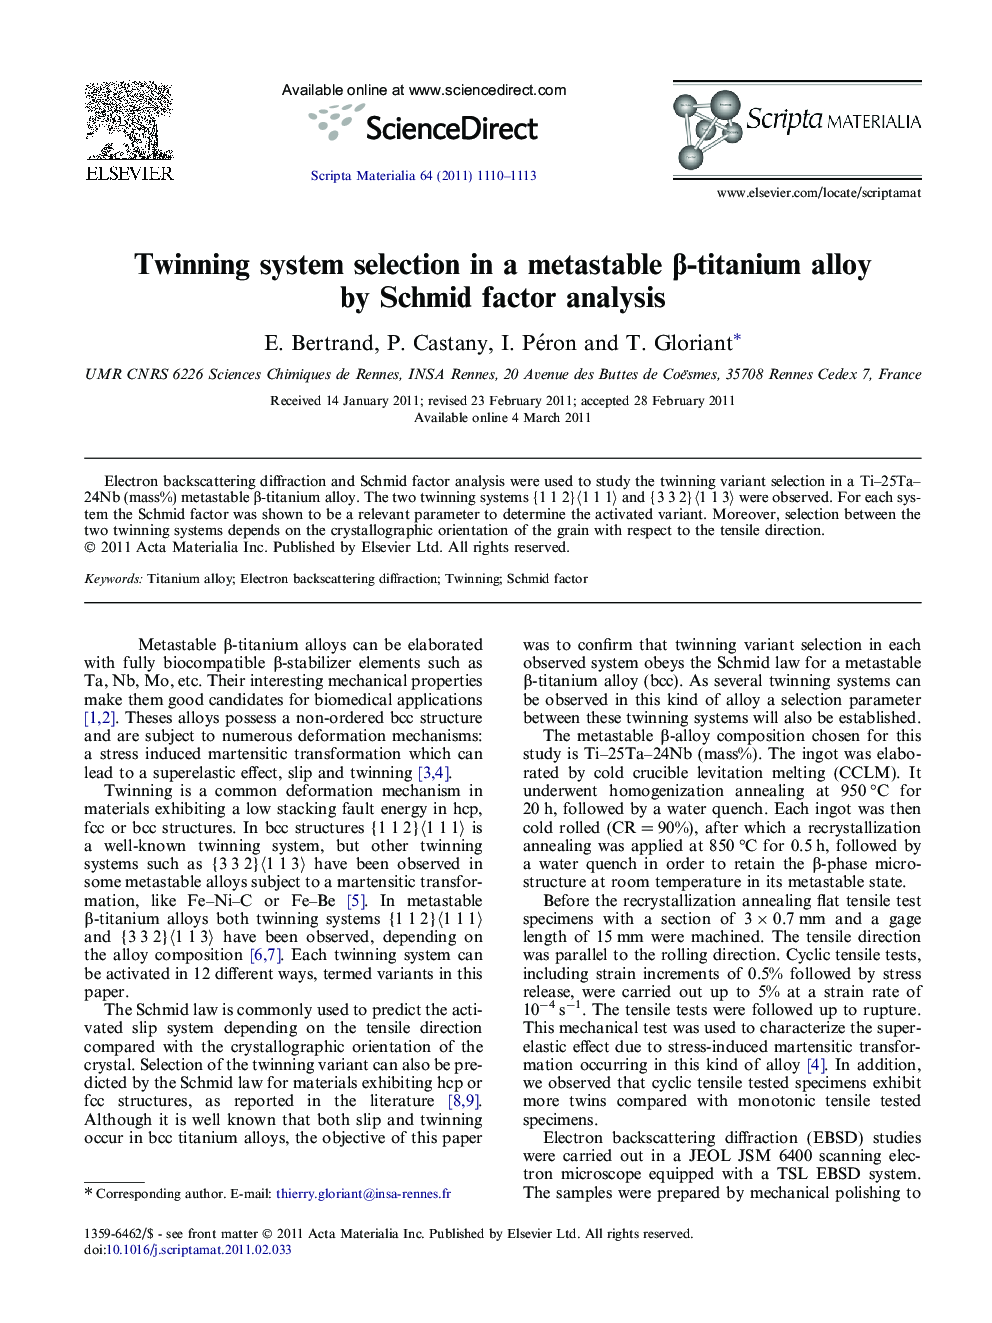 Twinning system selection in a metastable β-titanium alloy by Schmid factor analysis